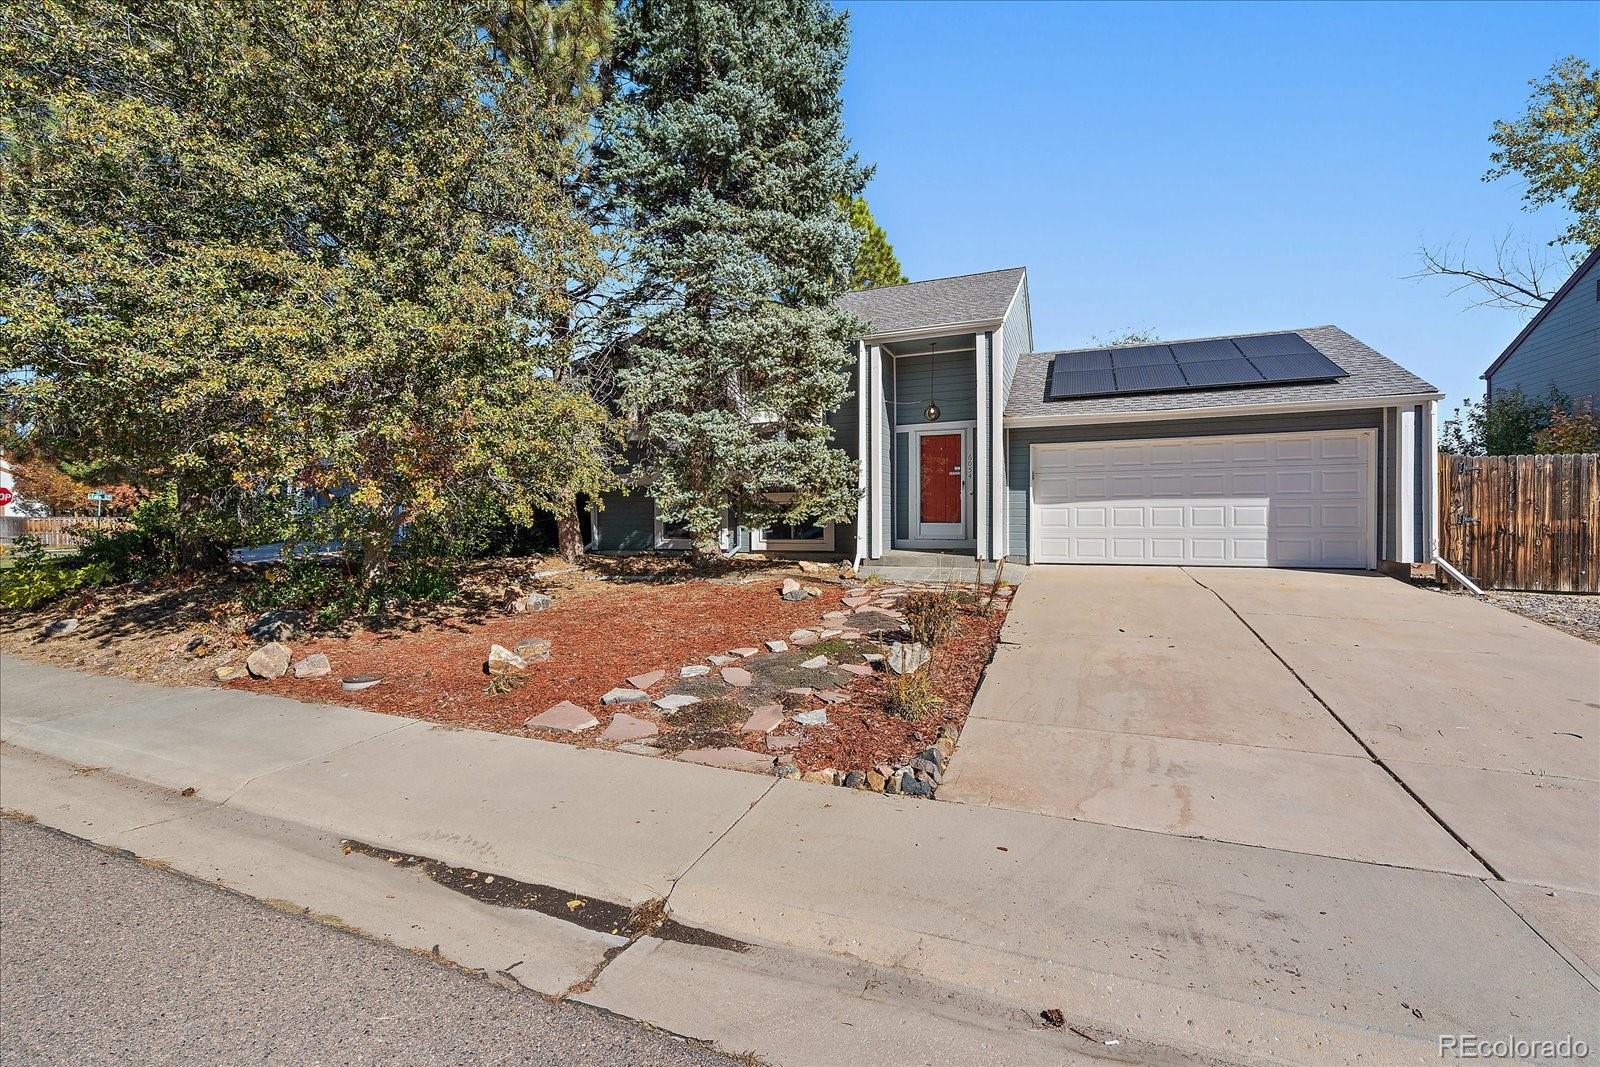 6054 s taft way, Littleton sold home. Closed on 2024-01-03 for $525,000.